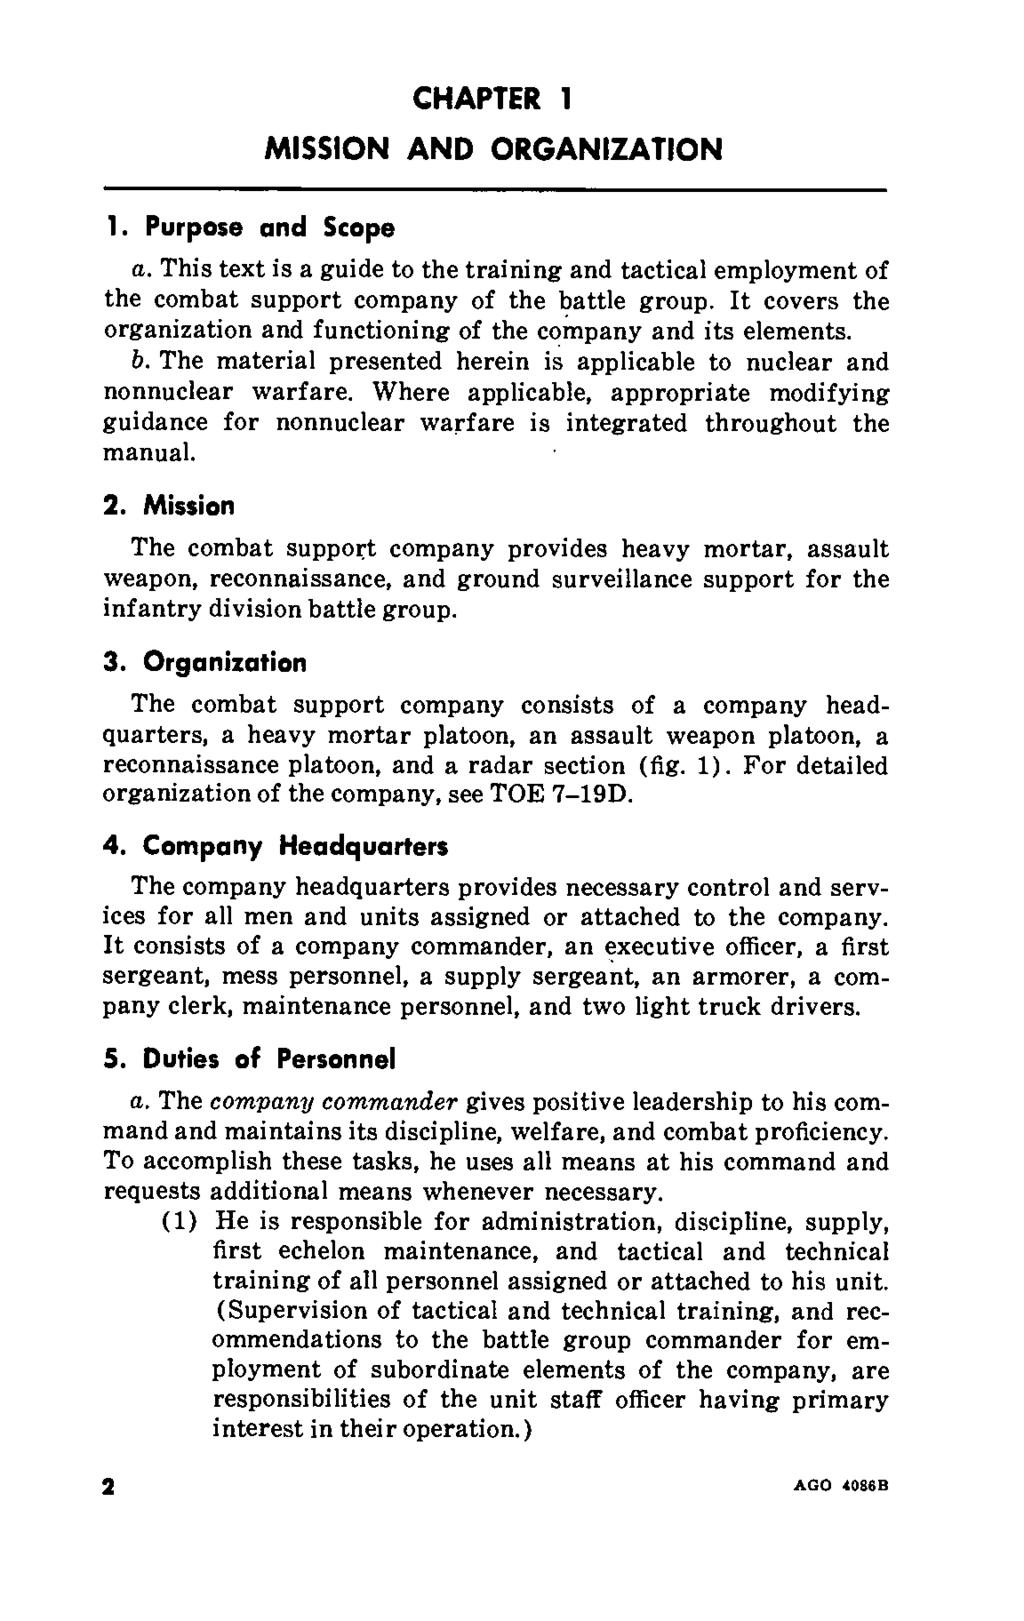 CHAPTER 1 MISSION AND ORGANIZATION 1. Purpose and Scope a. This text is a guide to the training and tactical employment of the combat support company of the battle group.